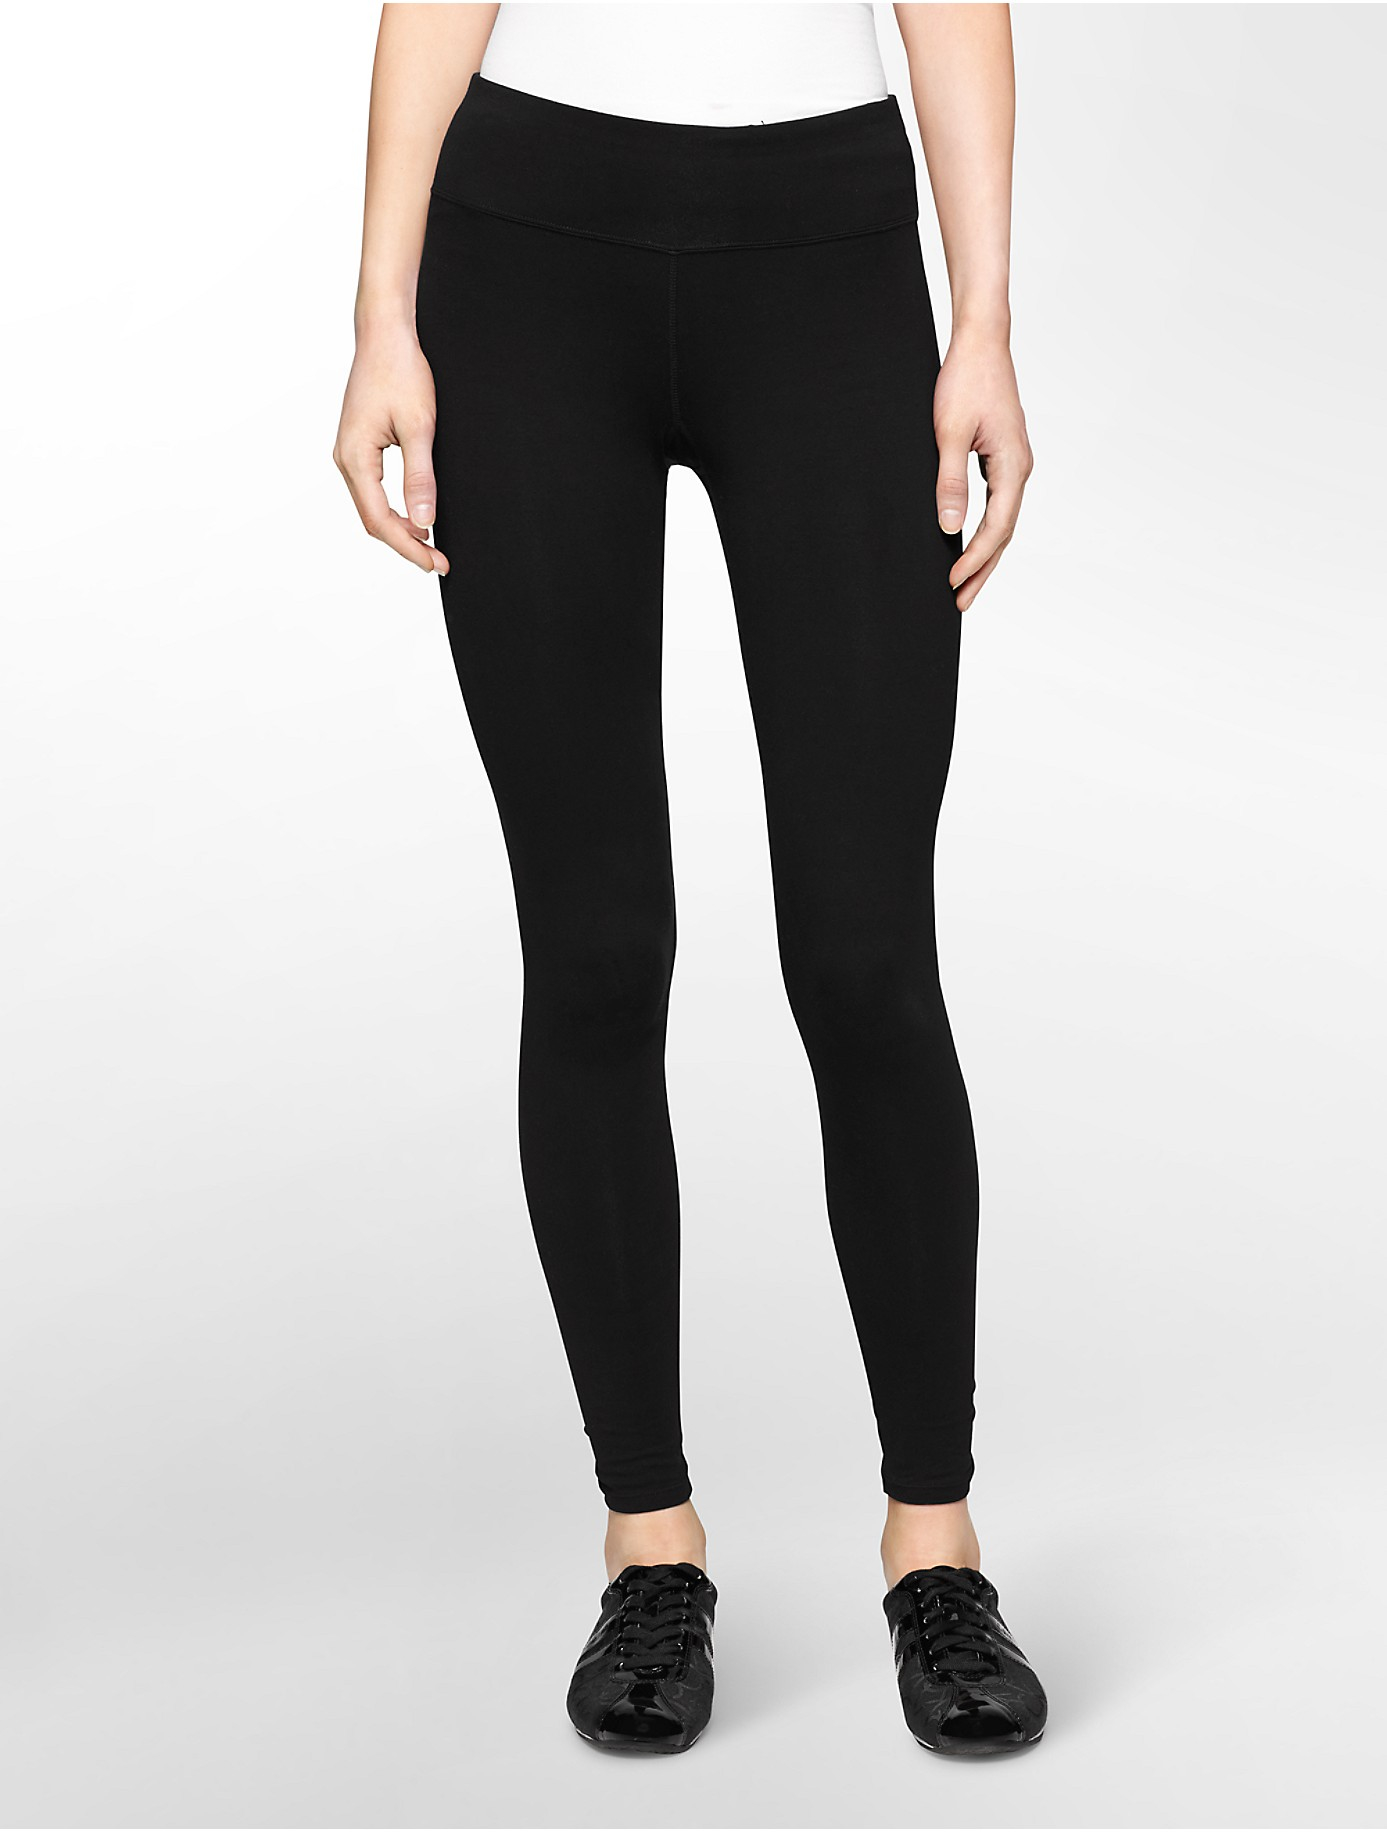 Lyst - Calvin Klein White Label Performance Ruched Ankle Leggings in Black